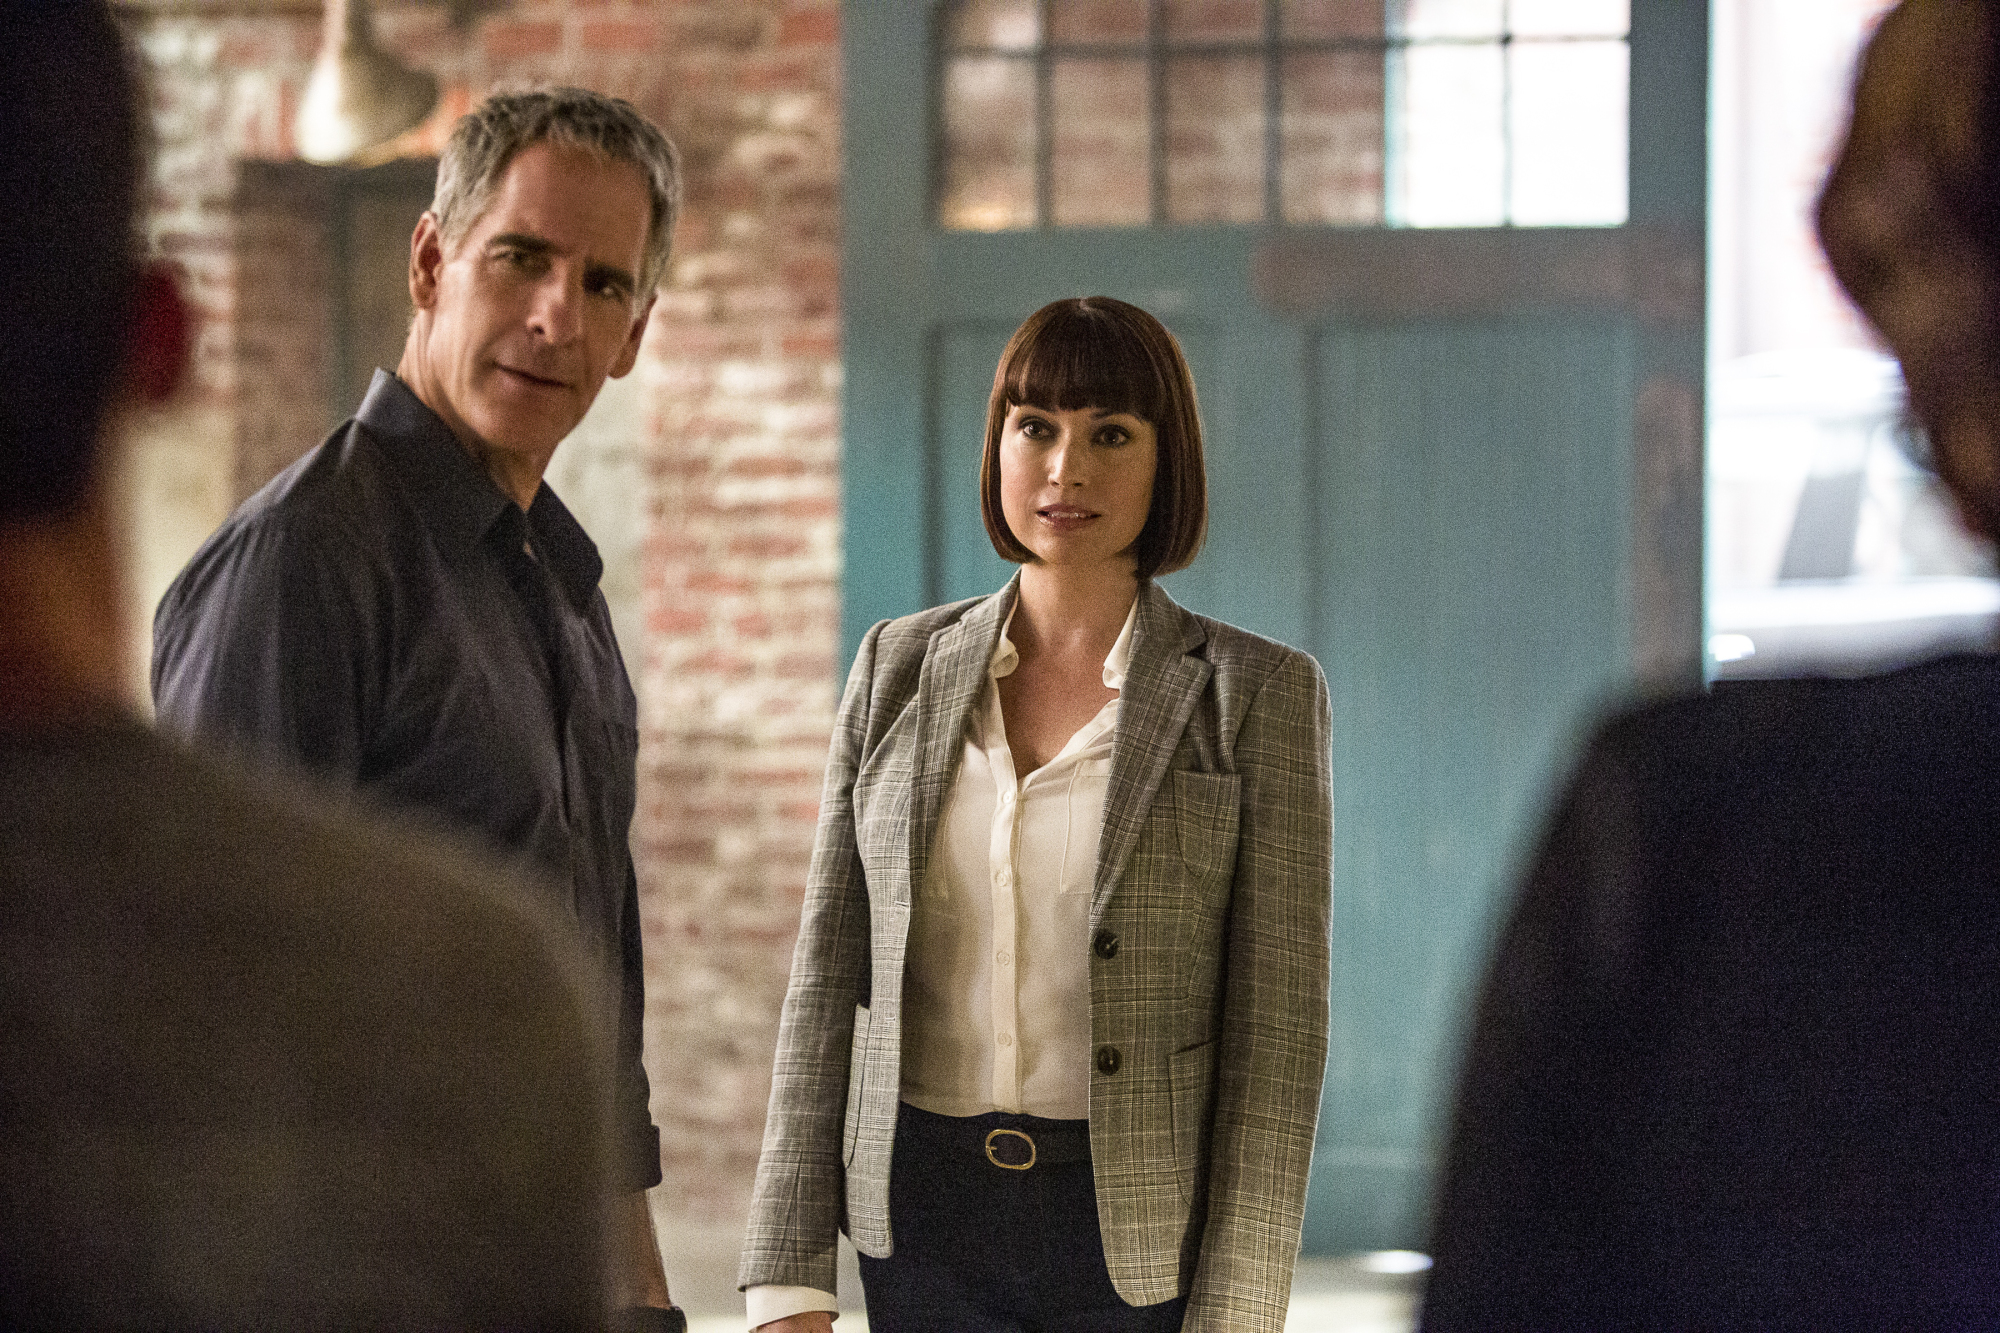 Scott Bakula as Special Agent Dwayne Pride and Julie Ann Emery as NCIS Special Agent Karen Hardy